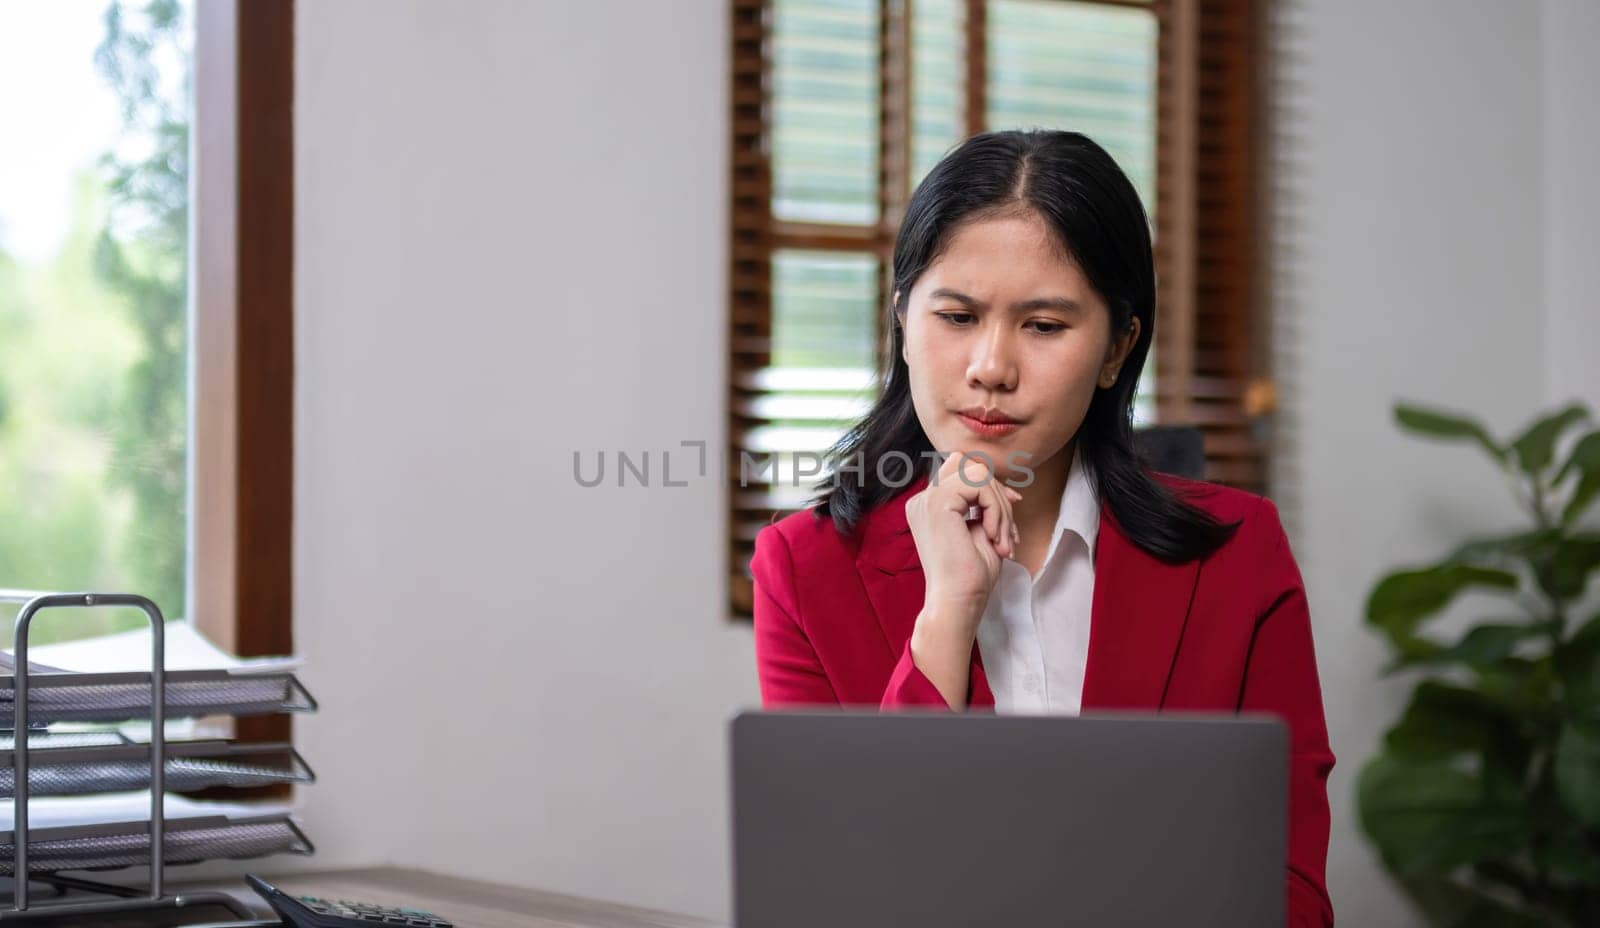 Young businesswoman has problems with her work in the office Feeling stressed and unhappy, showing a serious expression.